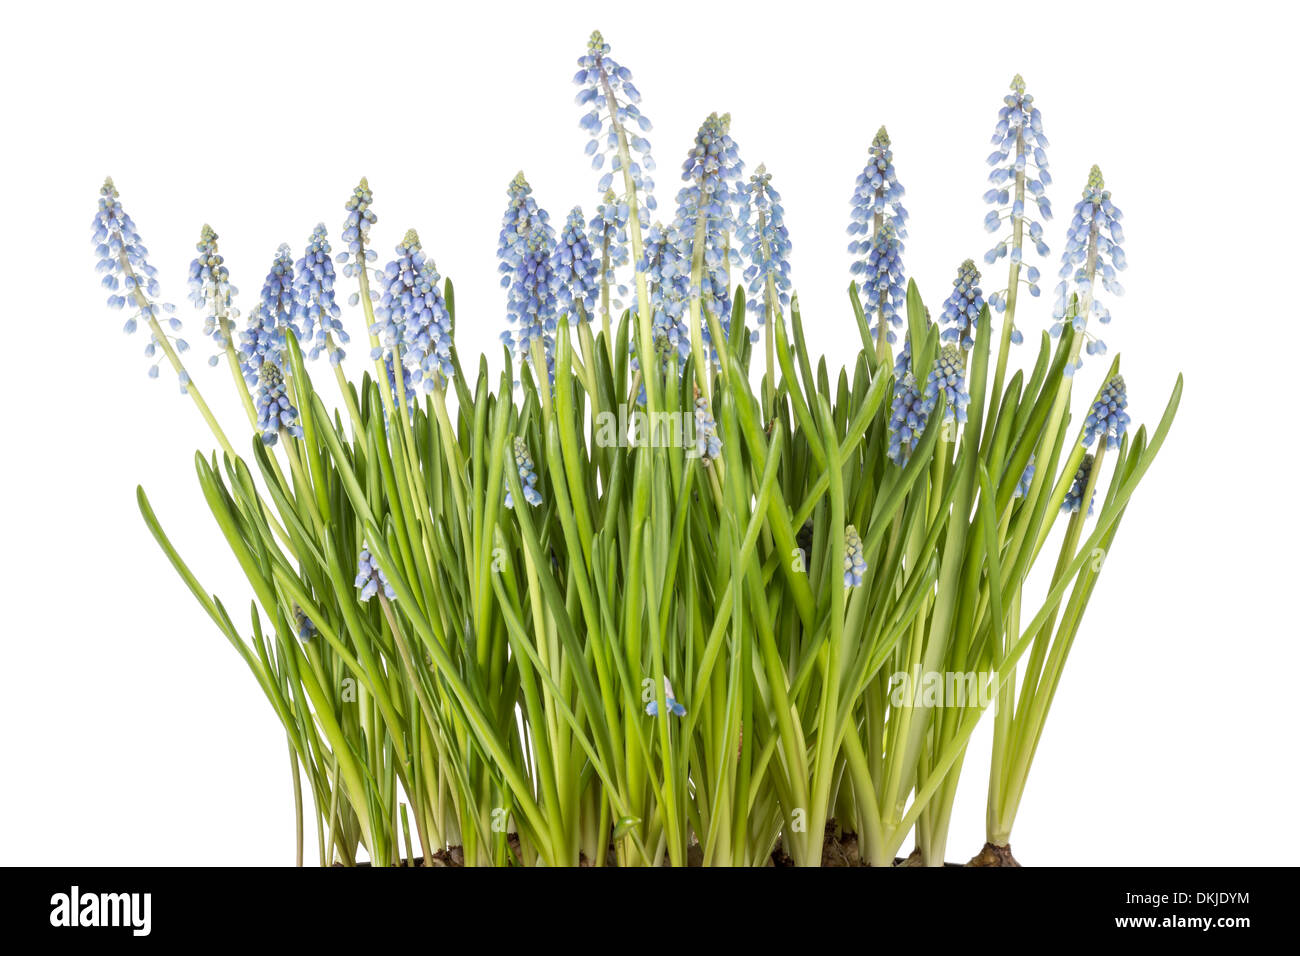 Muscari botryoides flowers also known as blue grape hyacinth in closeup over white background Stock Photo